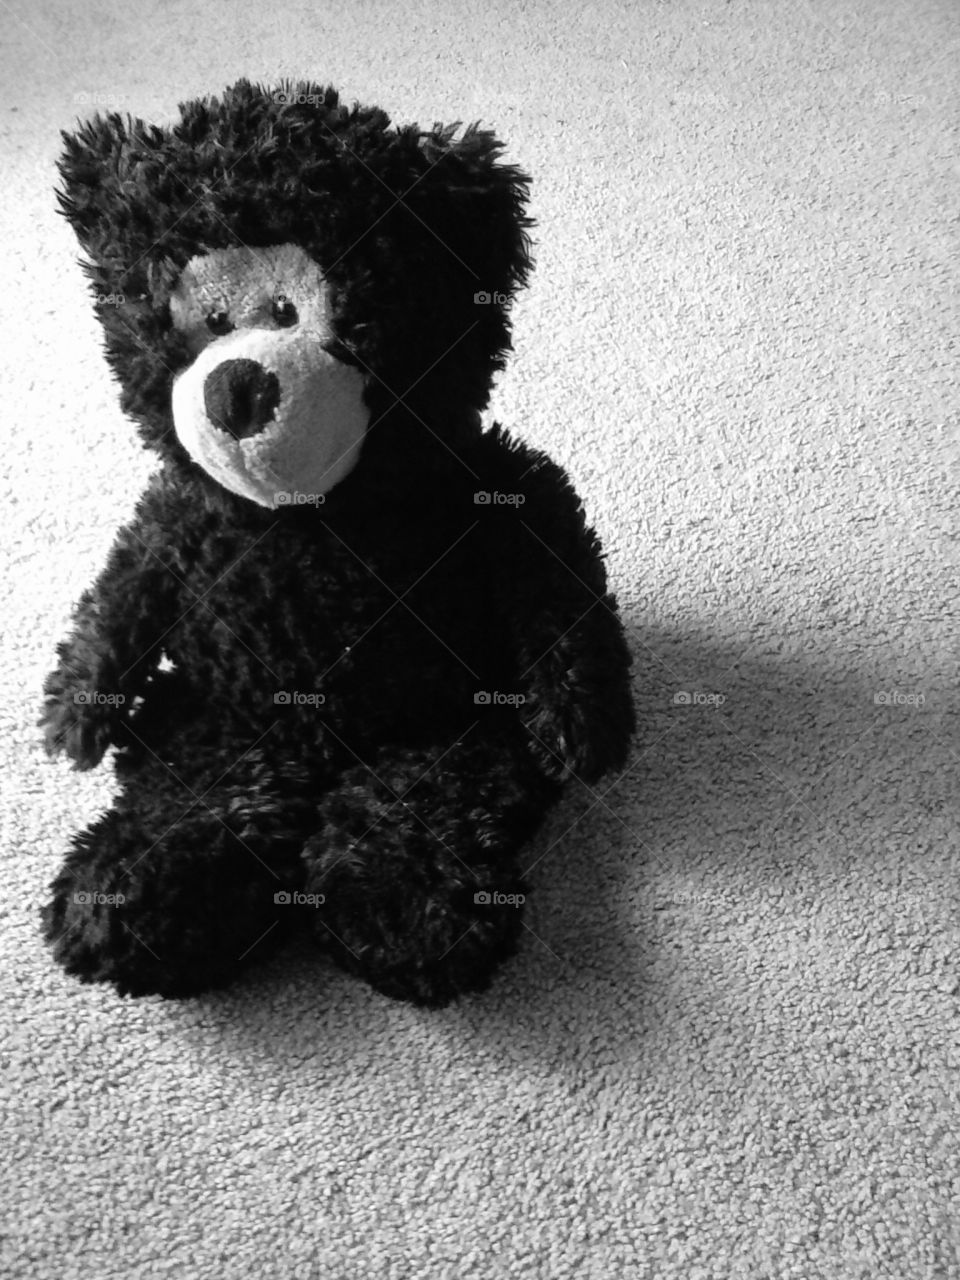 Alone Bear. After play, the stuffed toy has been left. Discarded by its owner.